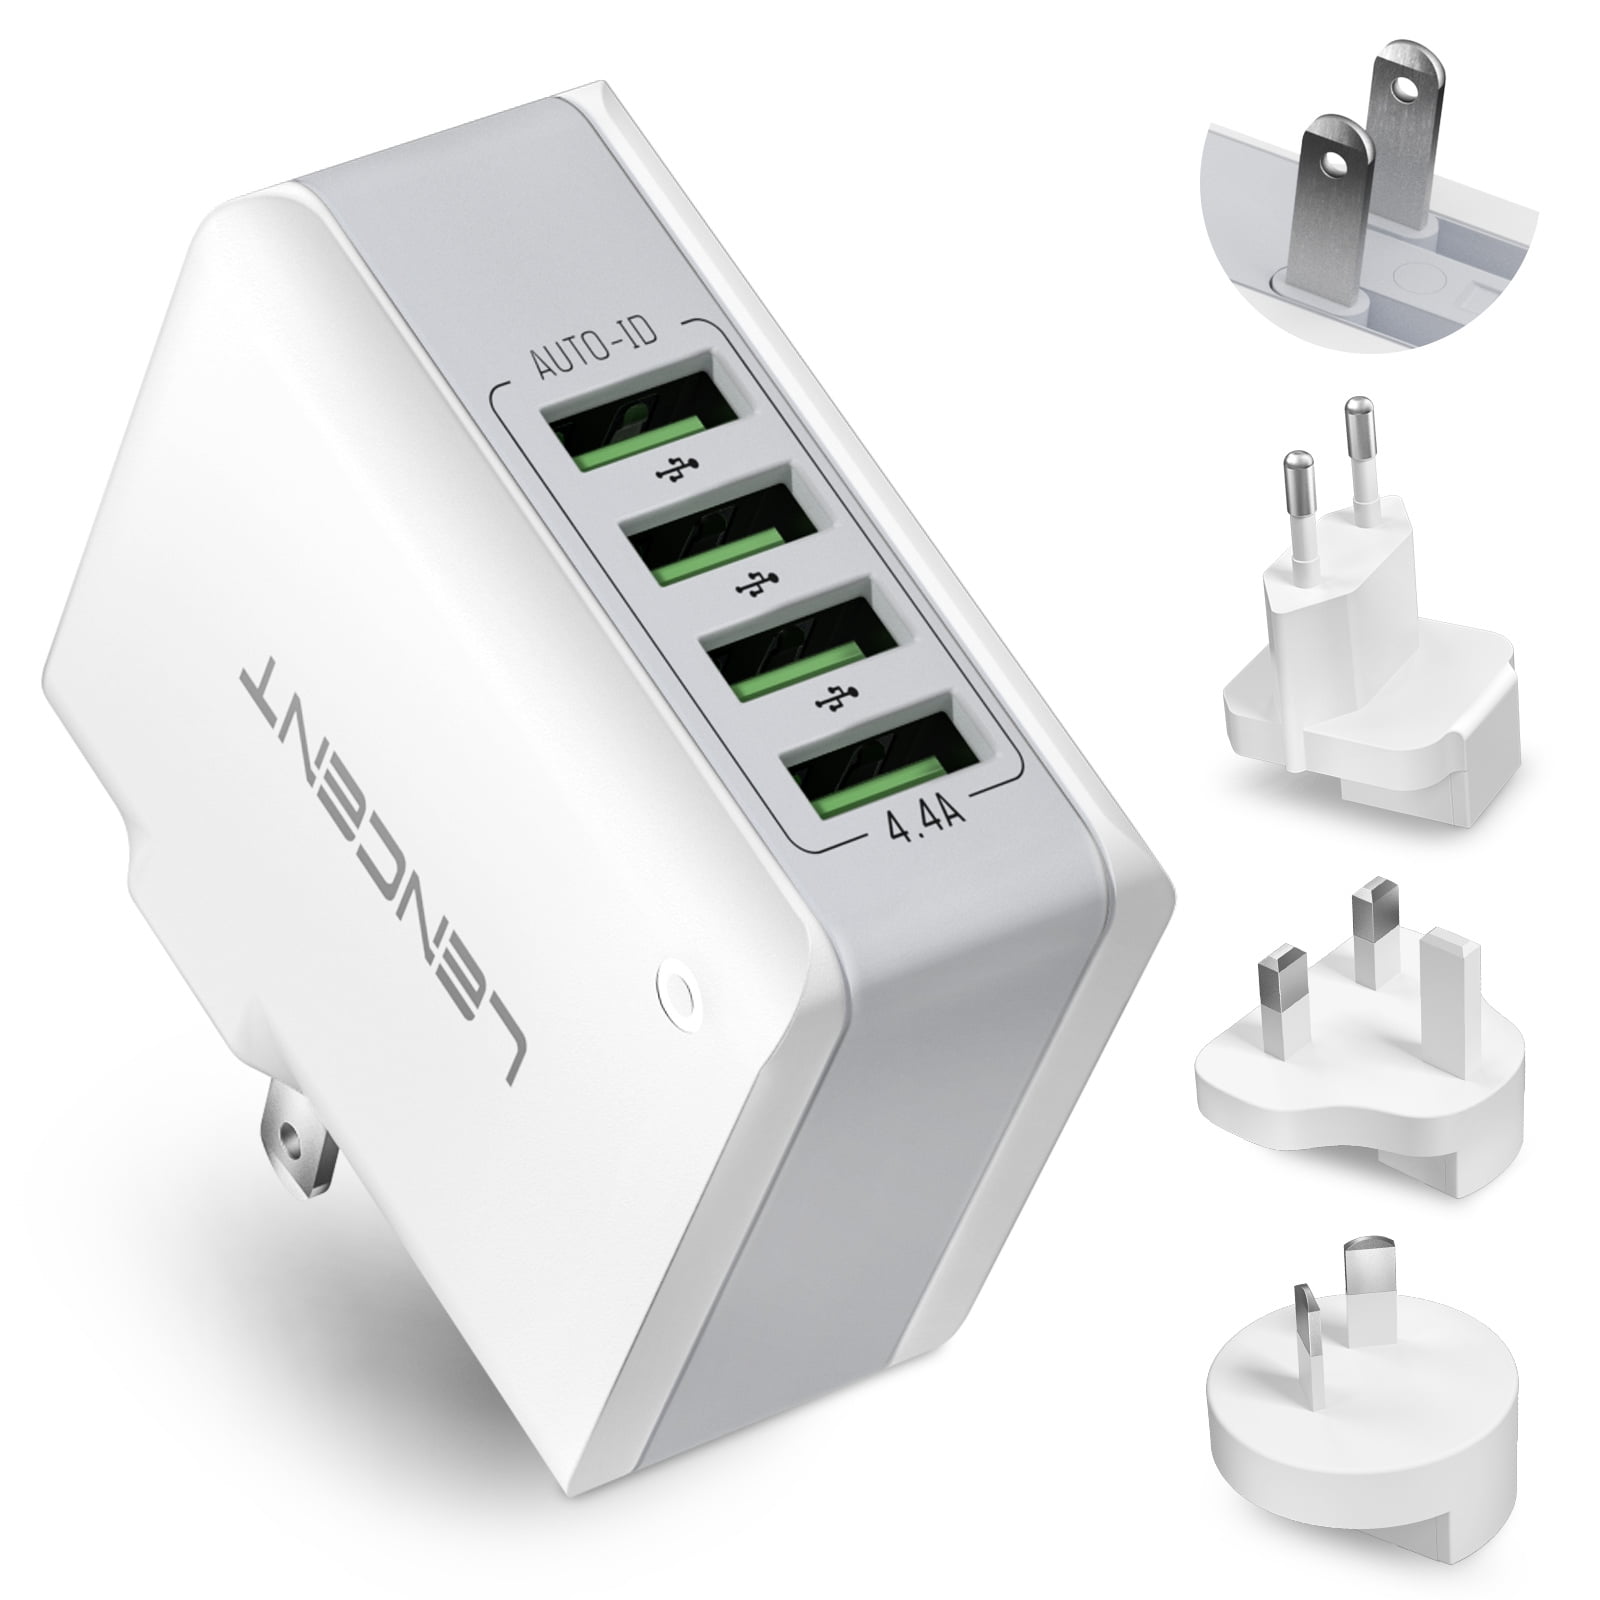 Paradis en anden Tog Multiple 4 Ports USB Wall Charger, International Travel Power Adapter,  Worldwide Cell Phone Charger With UK US EU European Australia Plug -  Walmart.com